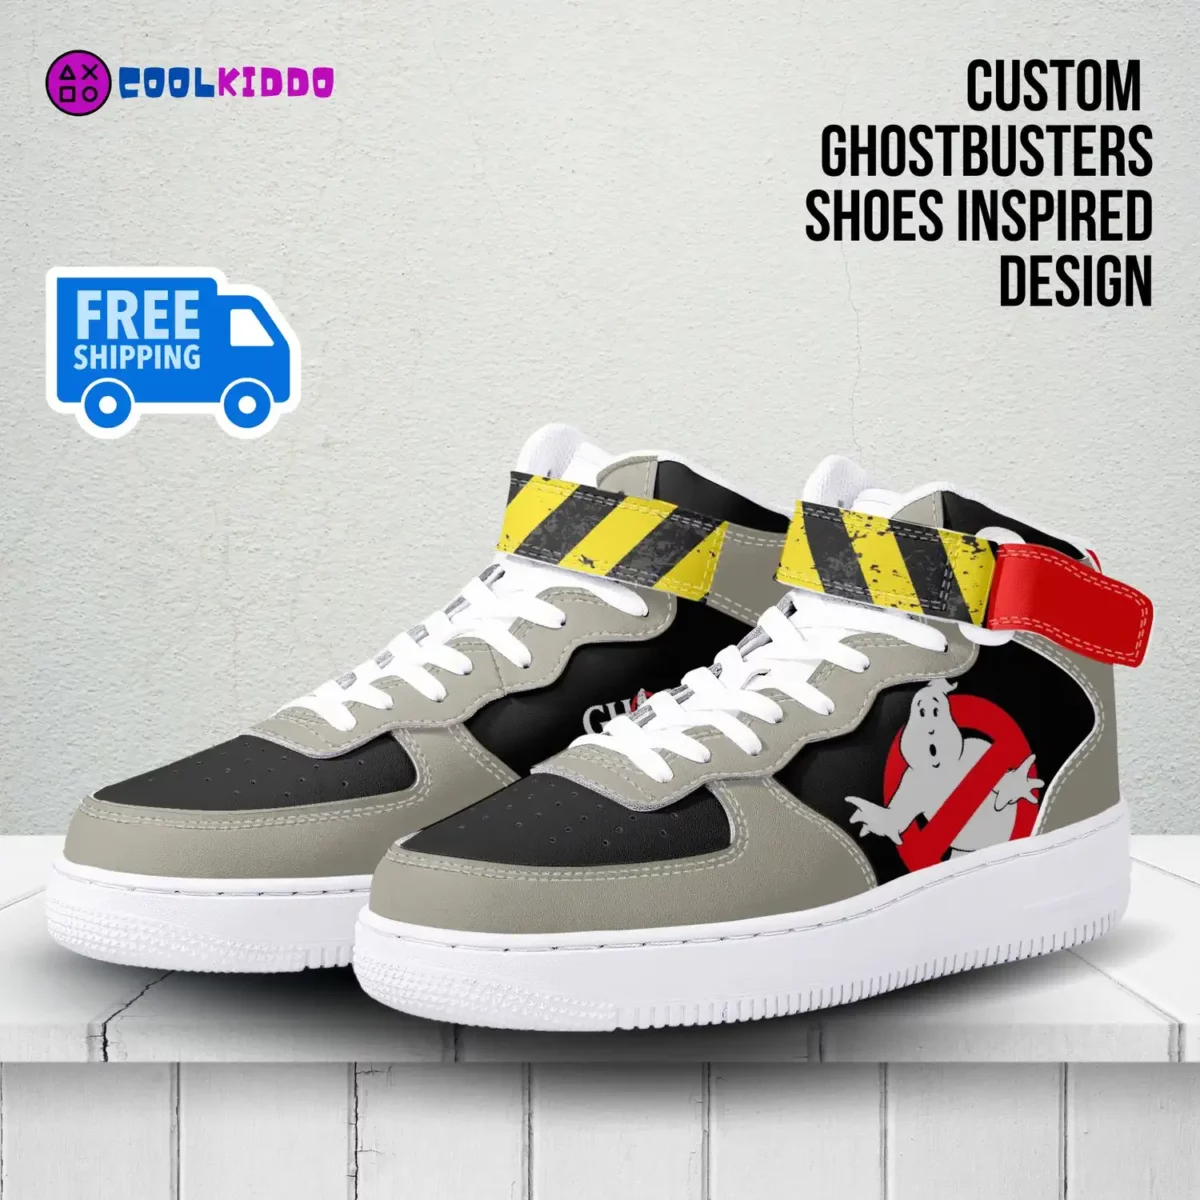 Custom GHOSTBUSTERS Air Force One Style High-Top Leather Sneakers – Casual Shoes for Youth/Adults Cool Kiddo 10